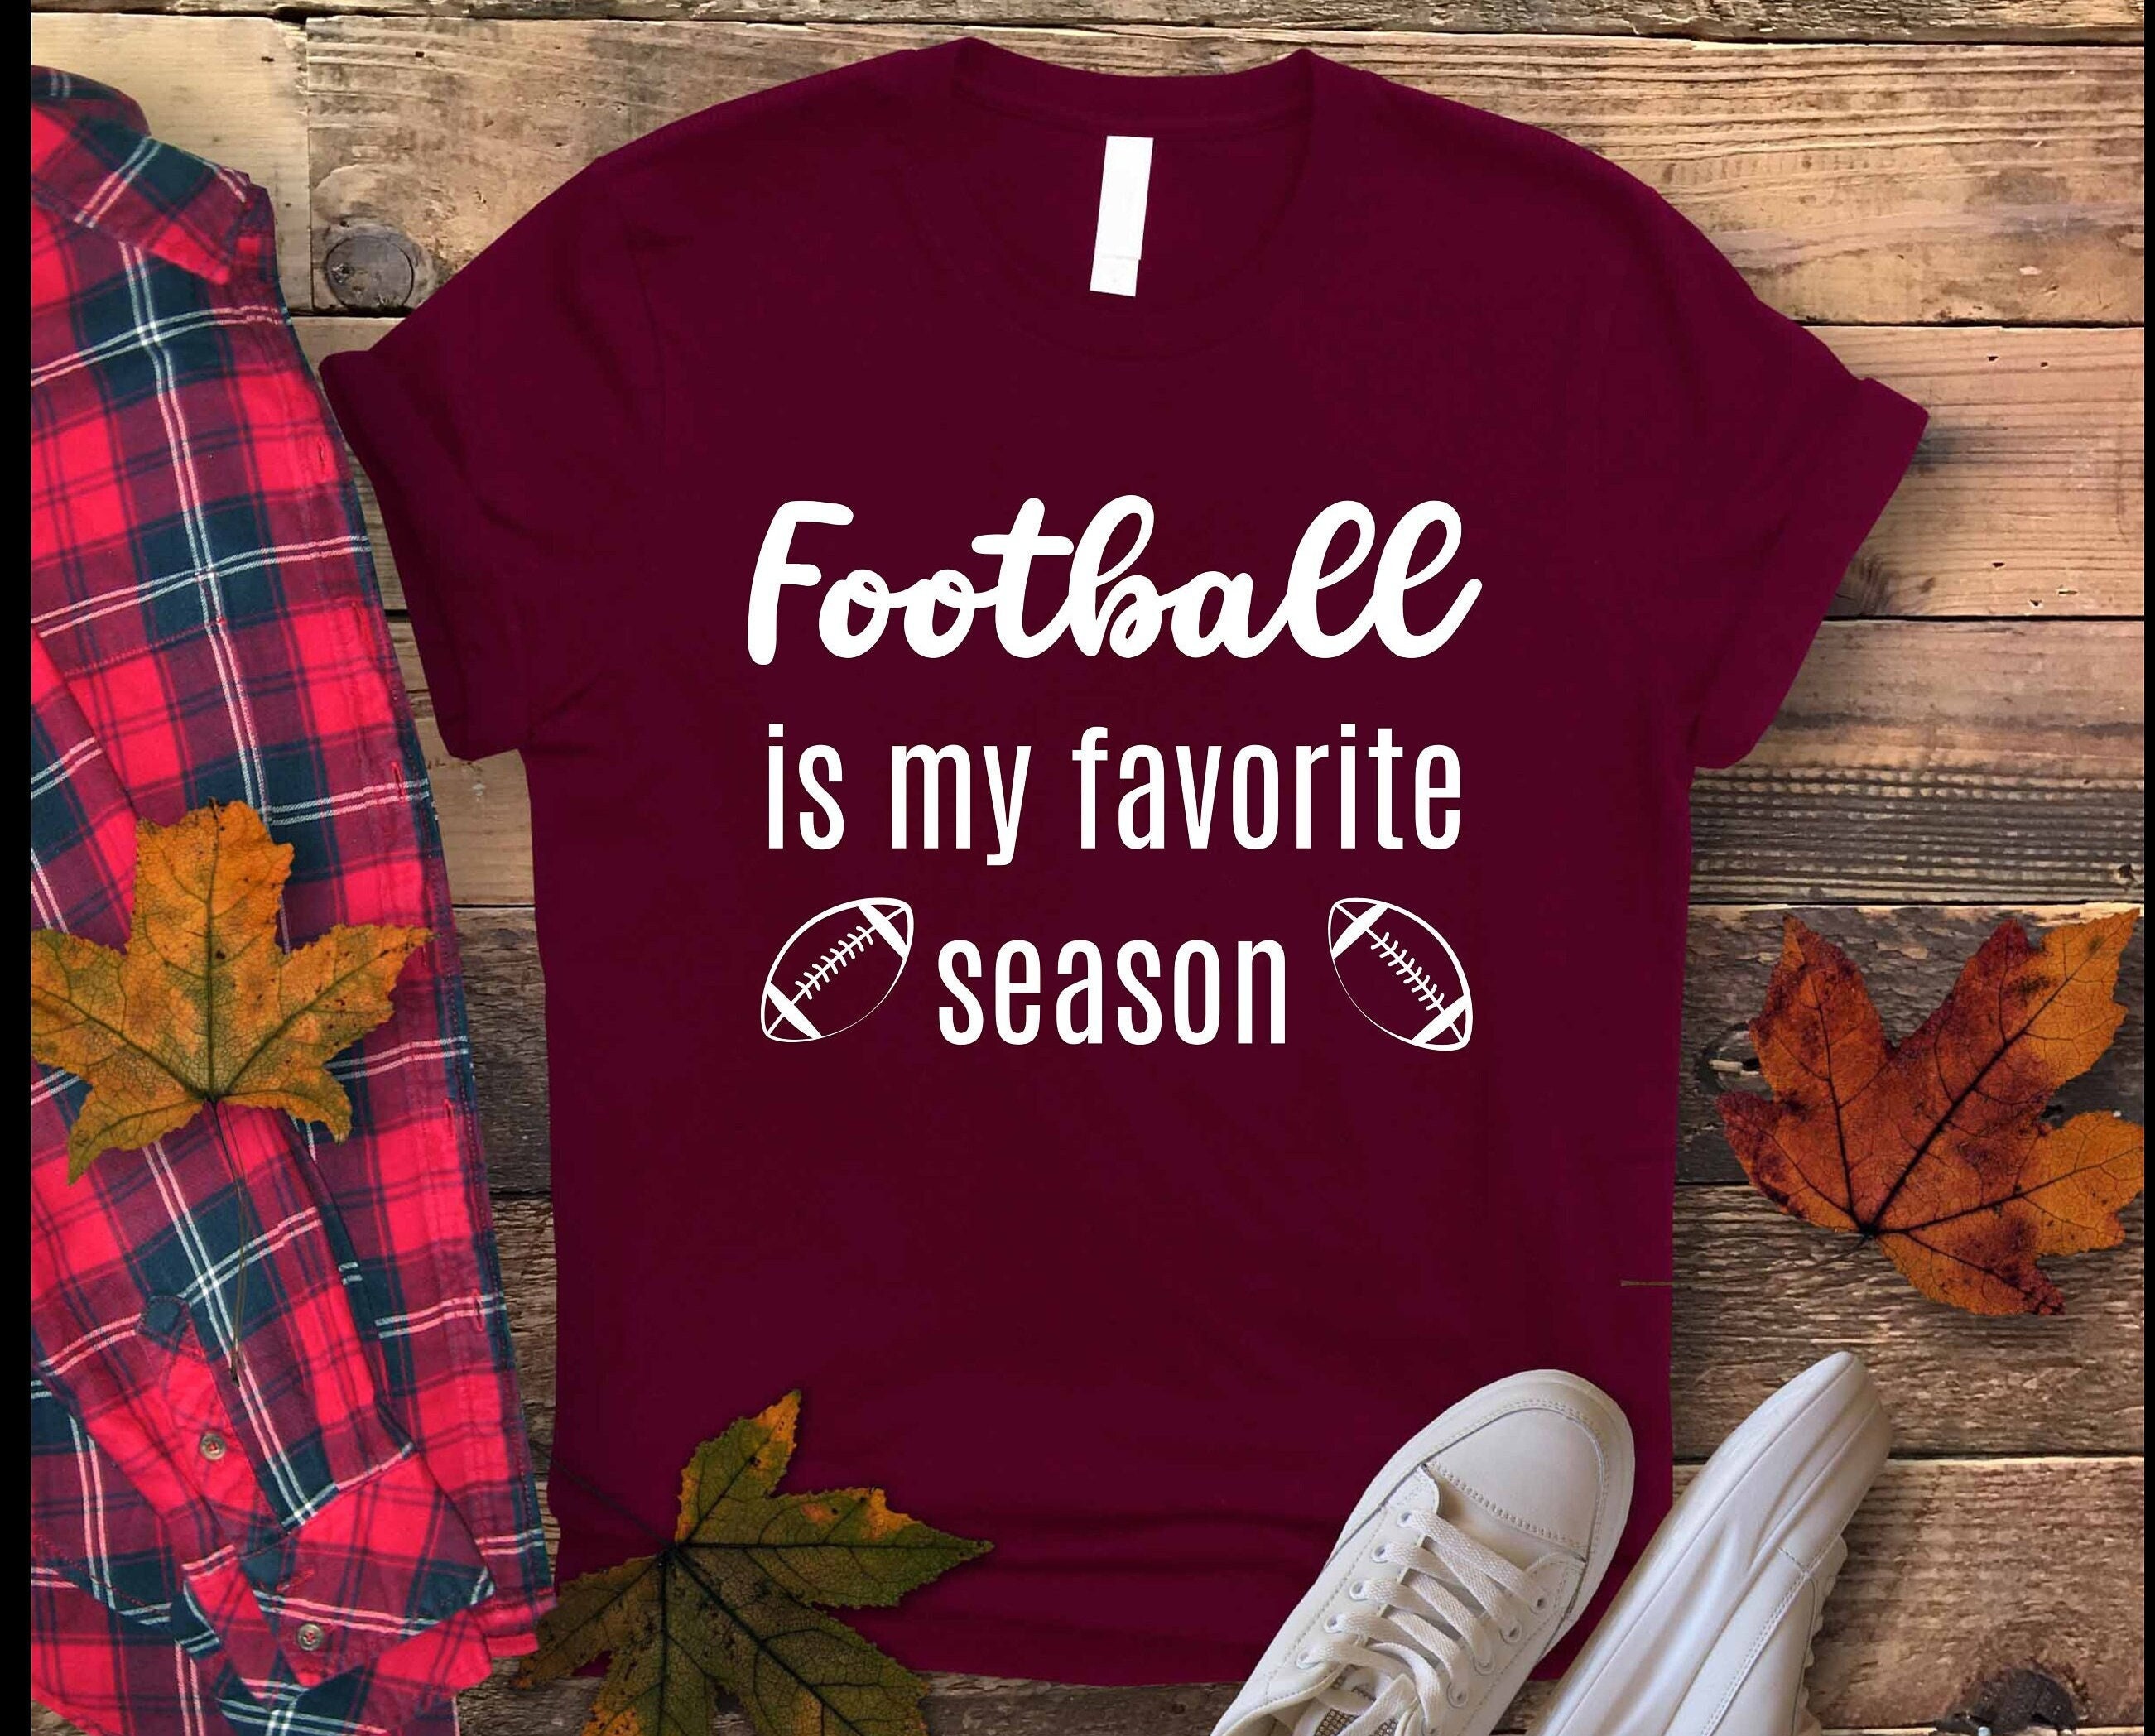 Hockey Is My Favorite Season Best Sports Lover Quotes Essential T-Shirt  for Sale by TierraLiu